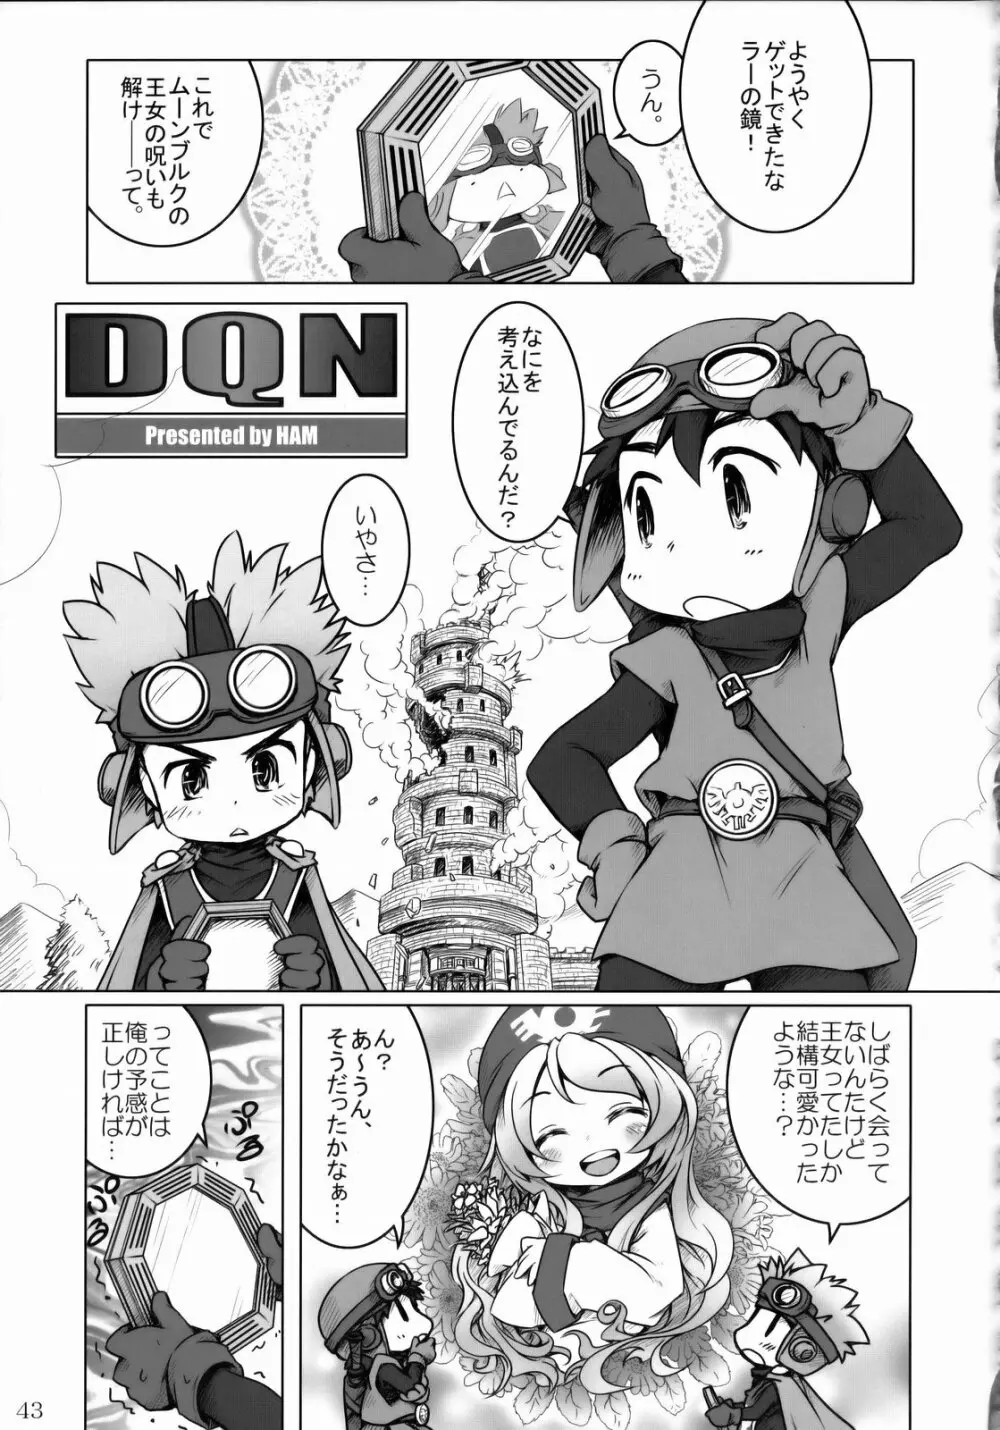 DQN.BLUE - page42